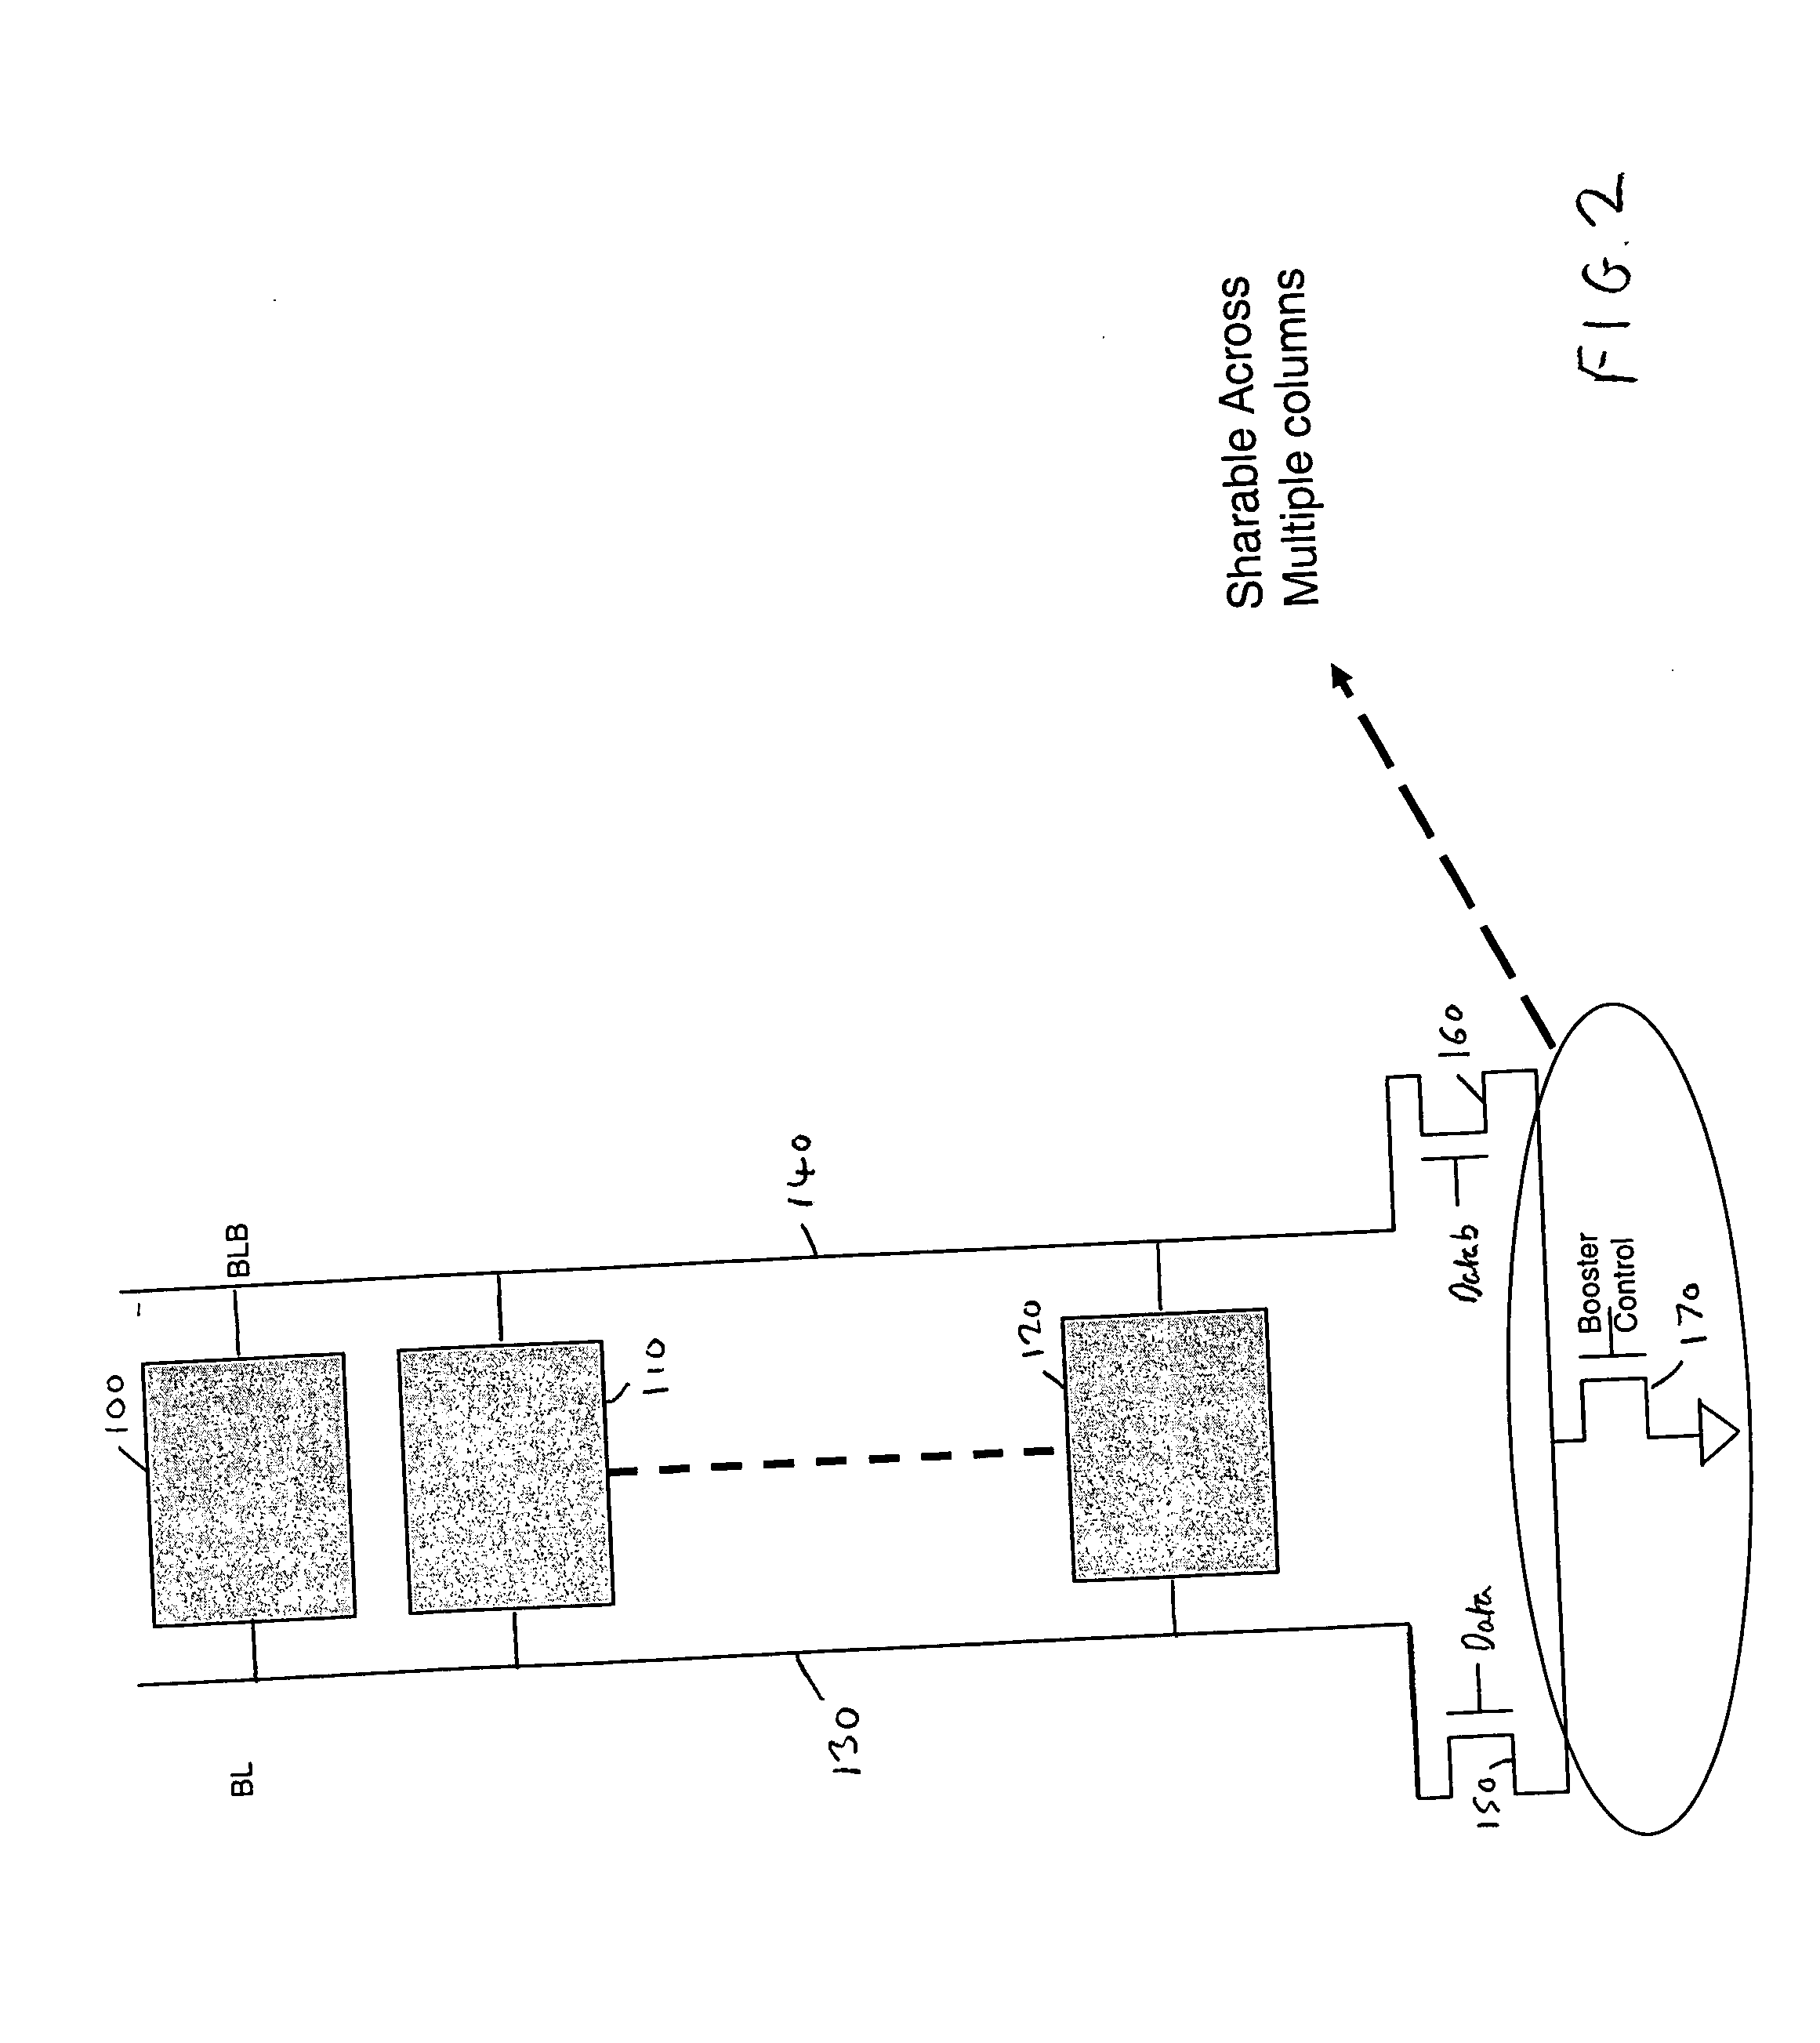 Memory device and method for performing write operations in such a memory device